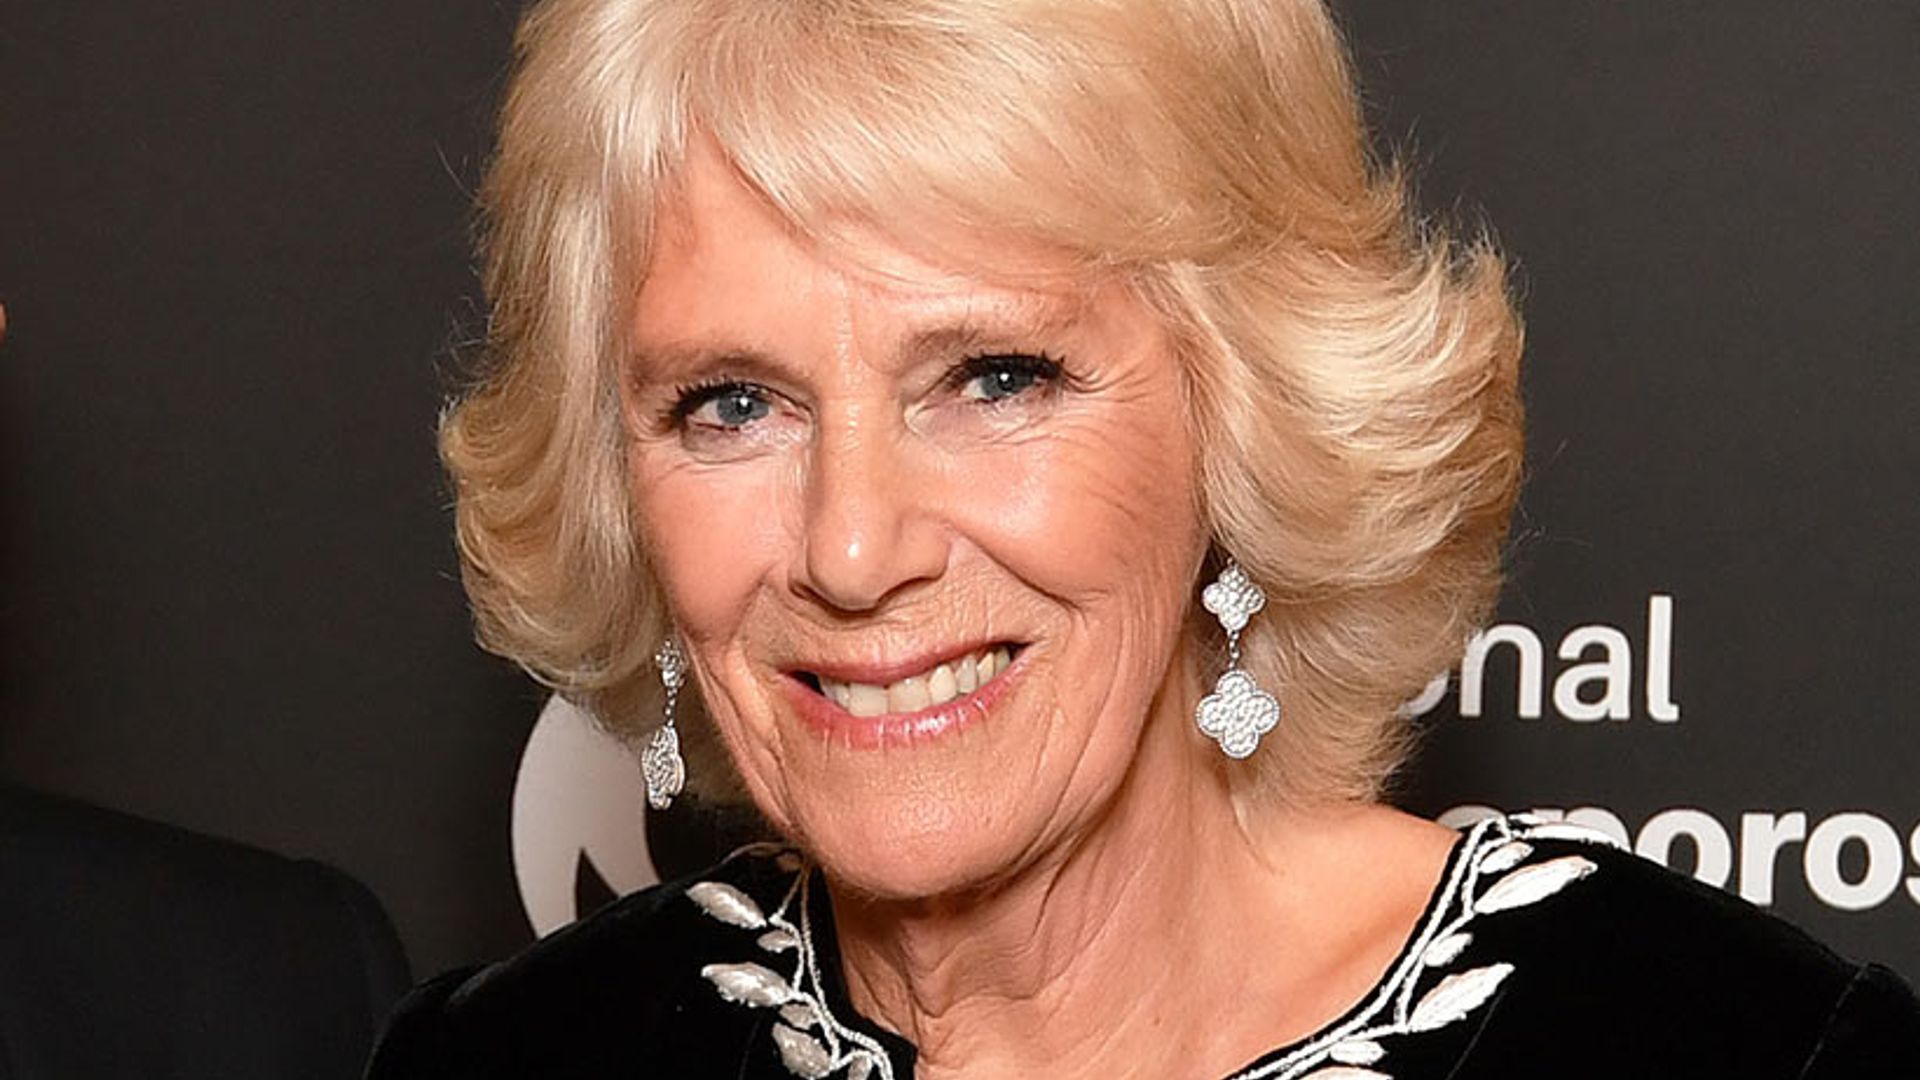 We need the Duchess of Cornwall's studded clutch bag for our Christmas party